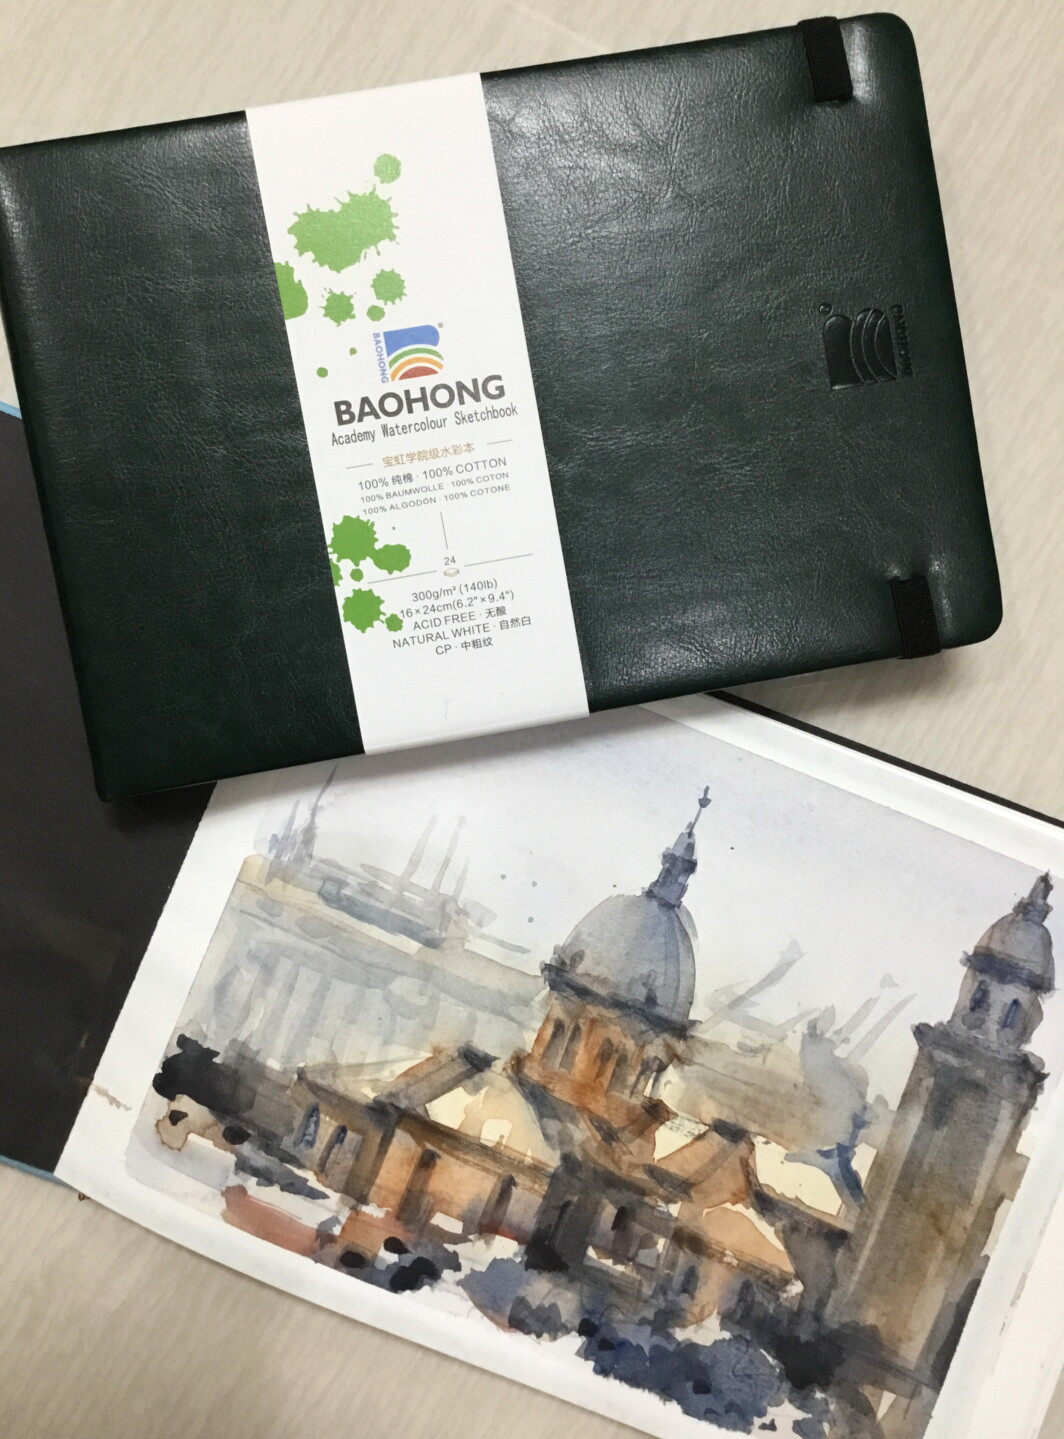 BAOHONG Watercolor Sketchbook 3.5 x 5.5 inch (9 cm x 14 cm) HARDCOVER Academy grade Watercolour Sketchbook Urban Sketching - 300 gsm Cold pressed, 24 sheets, 100% Cotton ACID-FREE-0